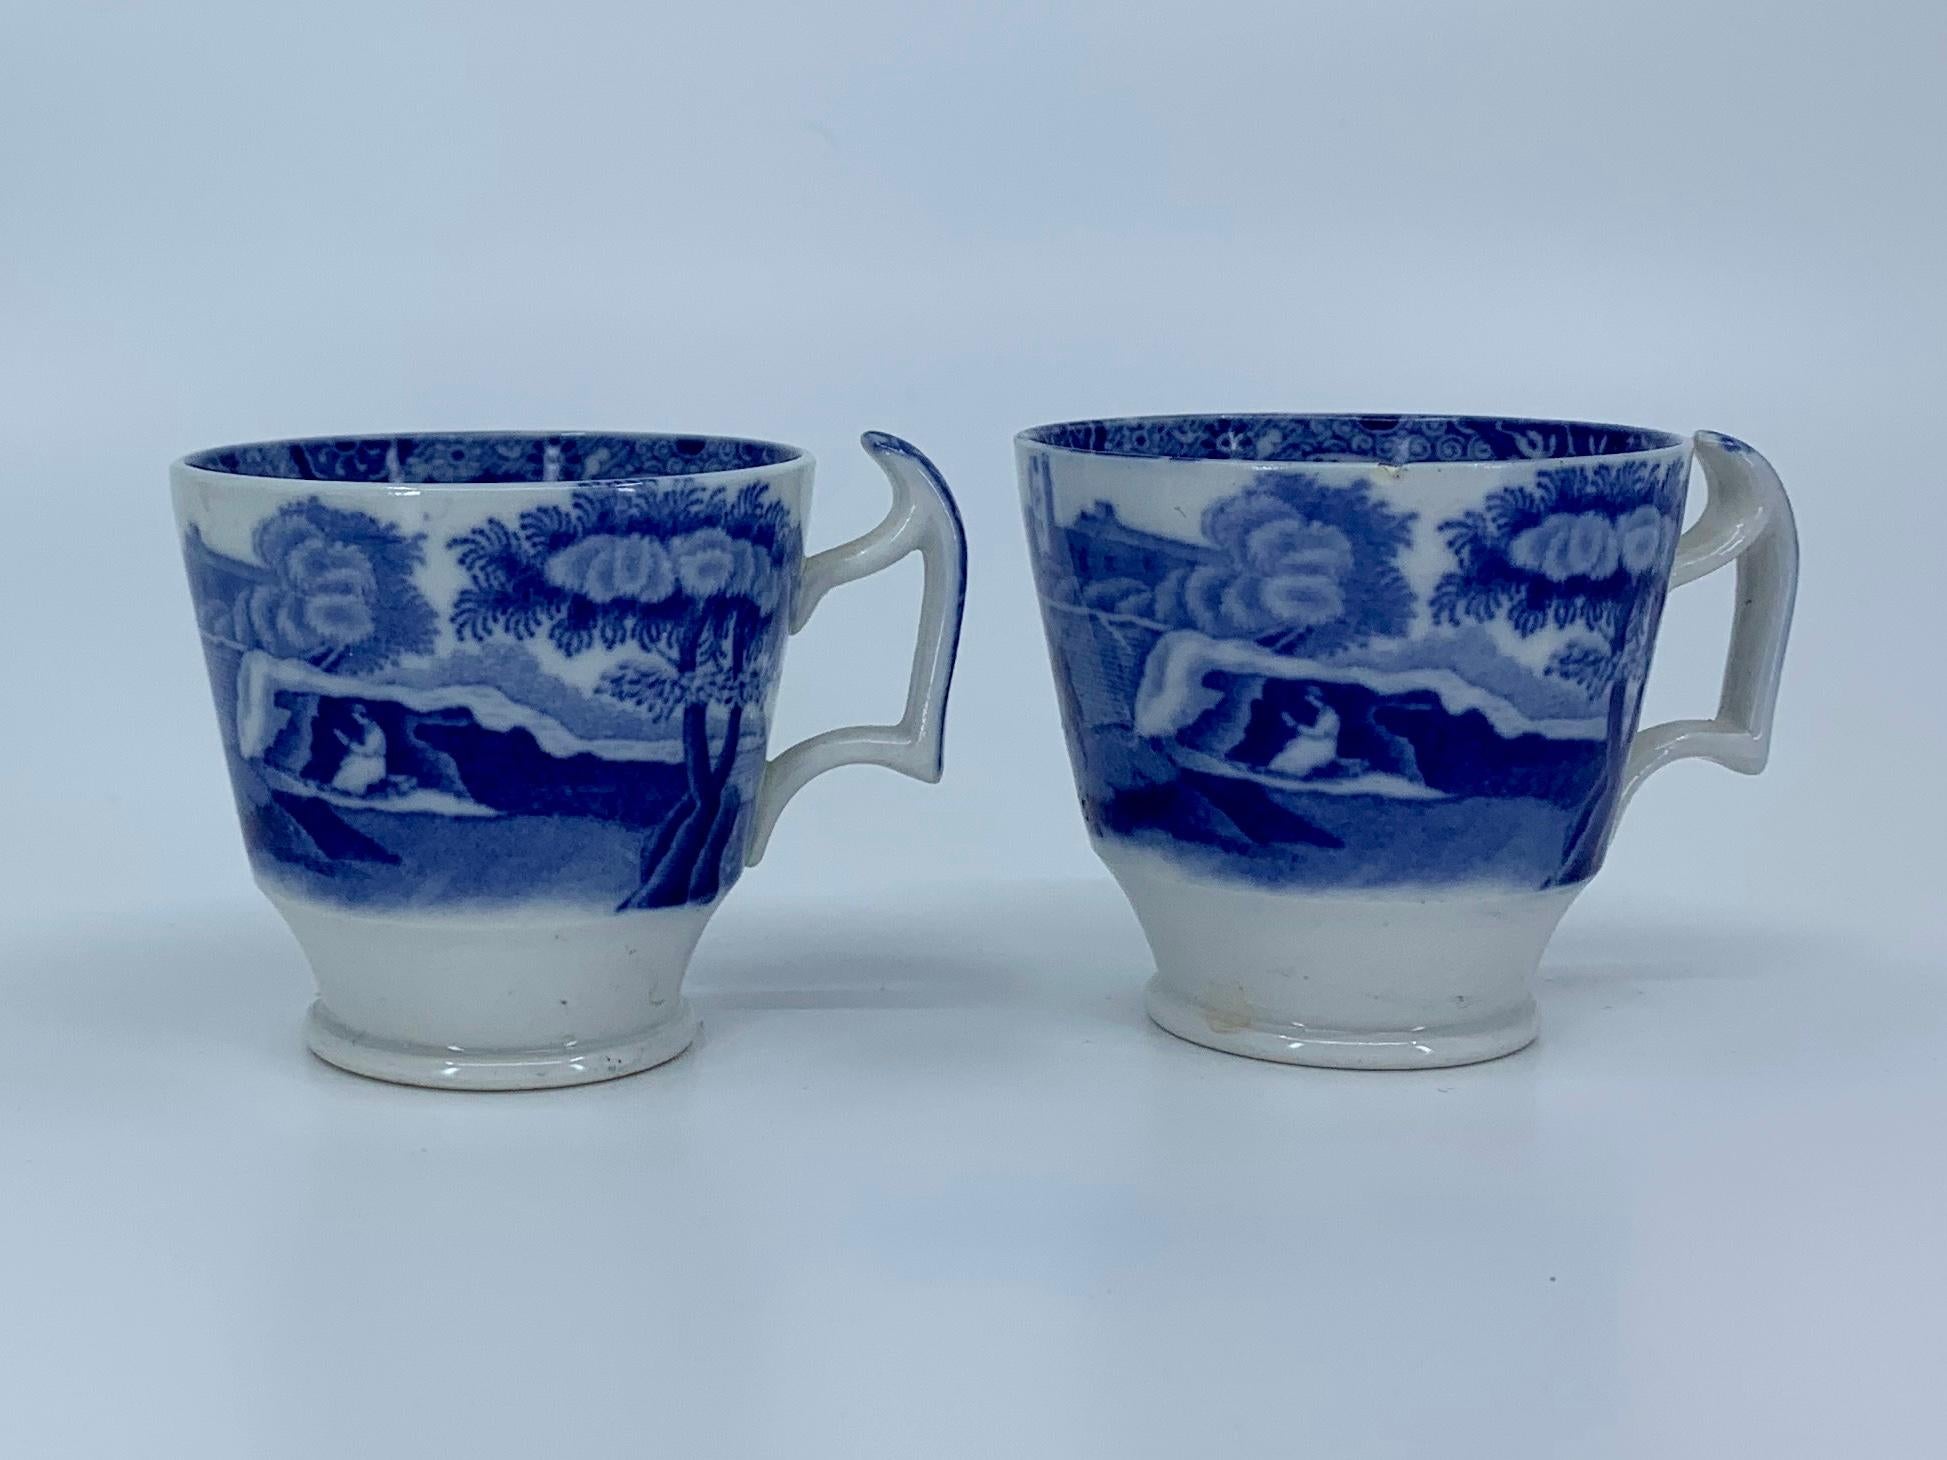 Six blue and white espresso cups. Assembled set of three pairs of English espresso cups and in rich blues and white featuring Italian landscapes, chinoiserie birds and chinoiserie reserves within pebbled field. The grouping includes:
Two blue and